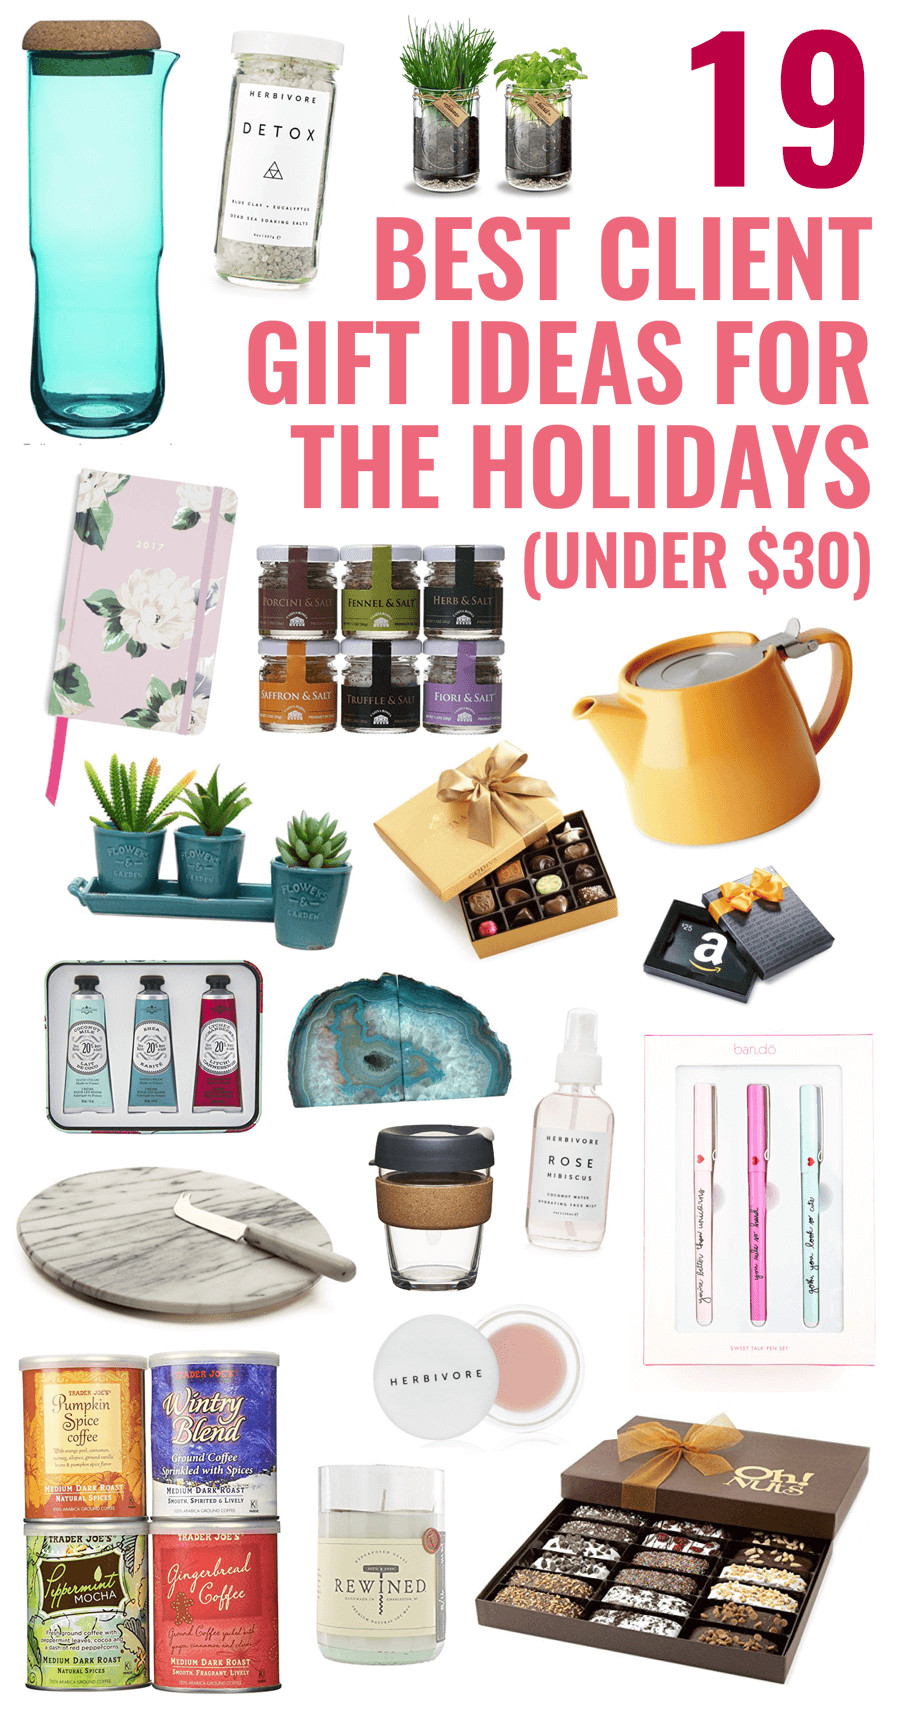 Business Holiday Gift Ideas
 19 Best Client Gift Ideas for the Holidays under $30